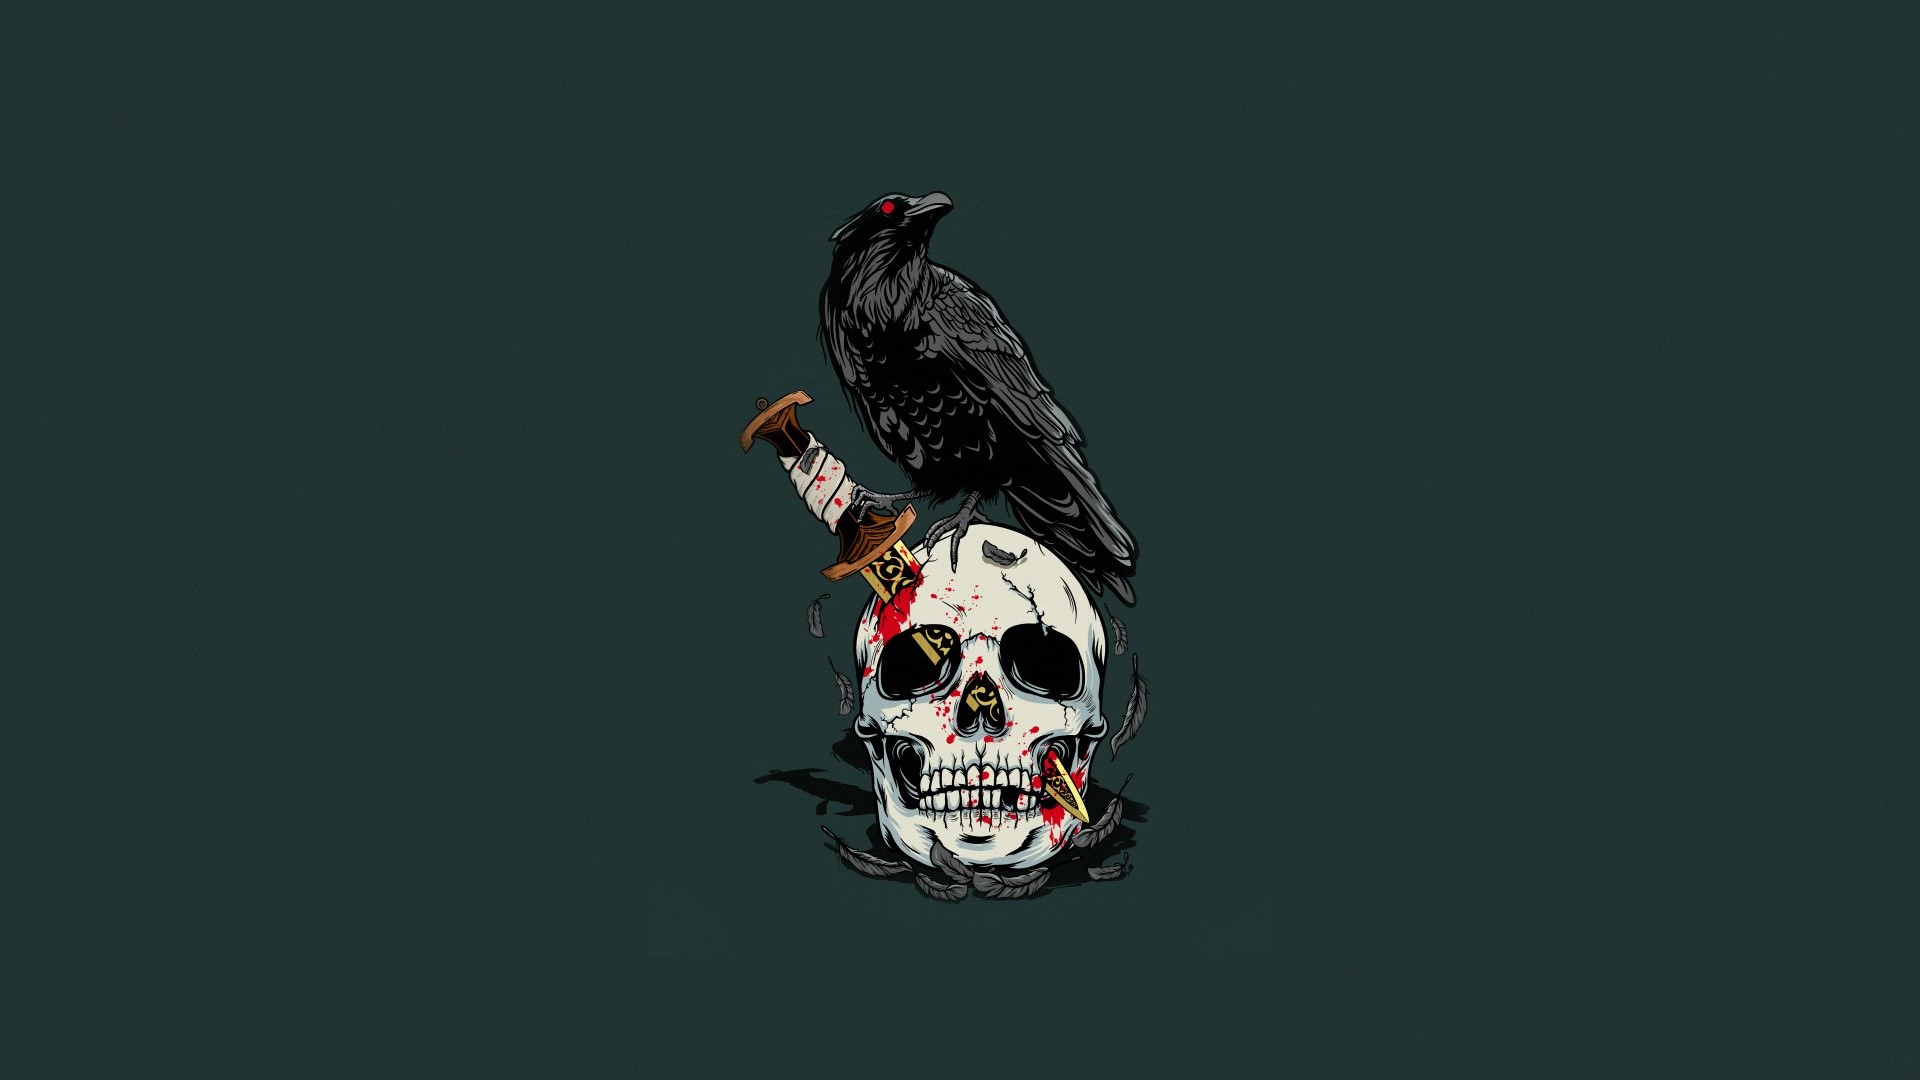 Birds simple background skull knife artwork green animals teeth feathers blood green background raven